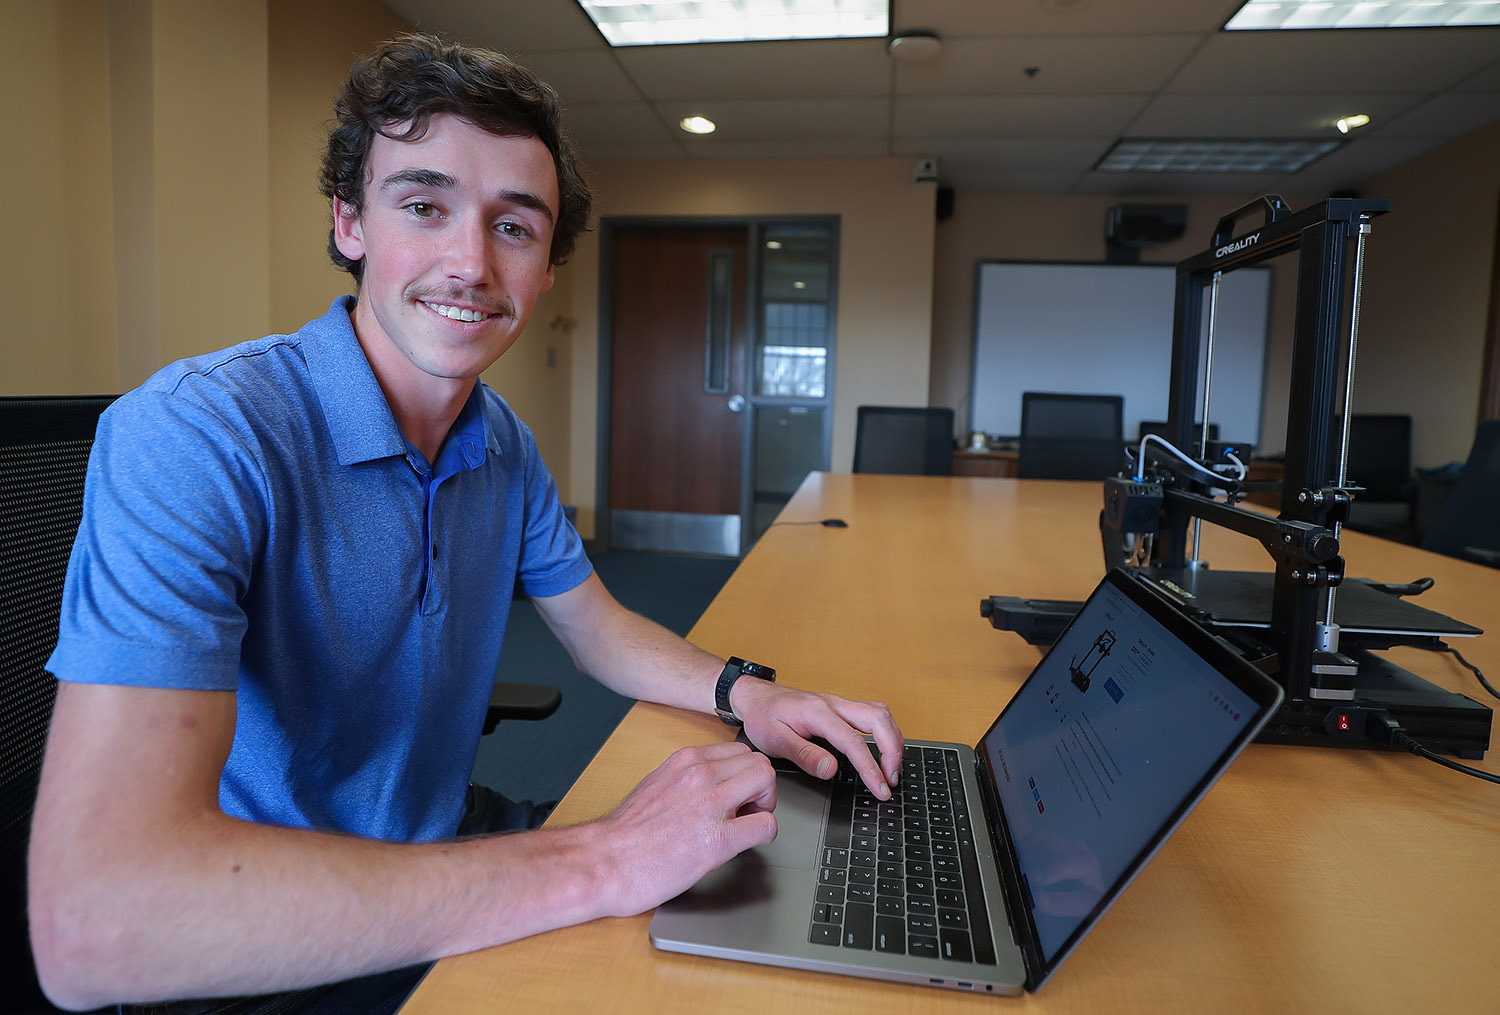 UNK junior Justin Vrooman is co-owner of Heartland 3D, an online business that sells 3D printers and filament.